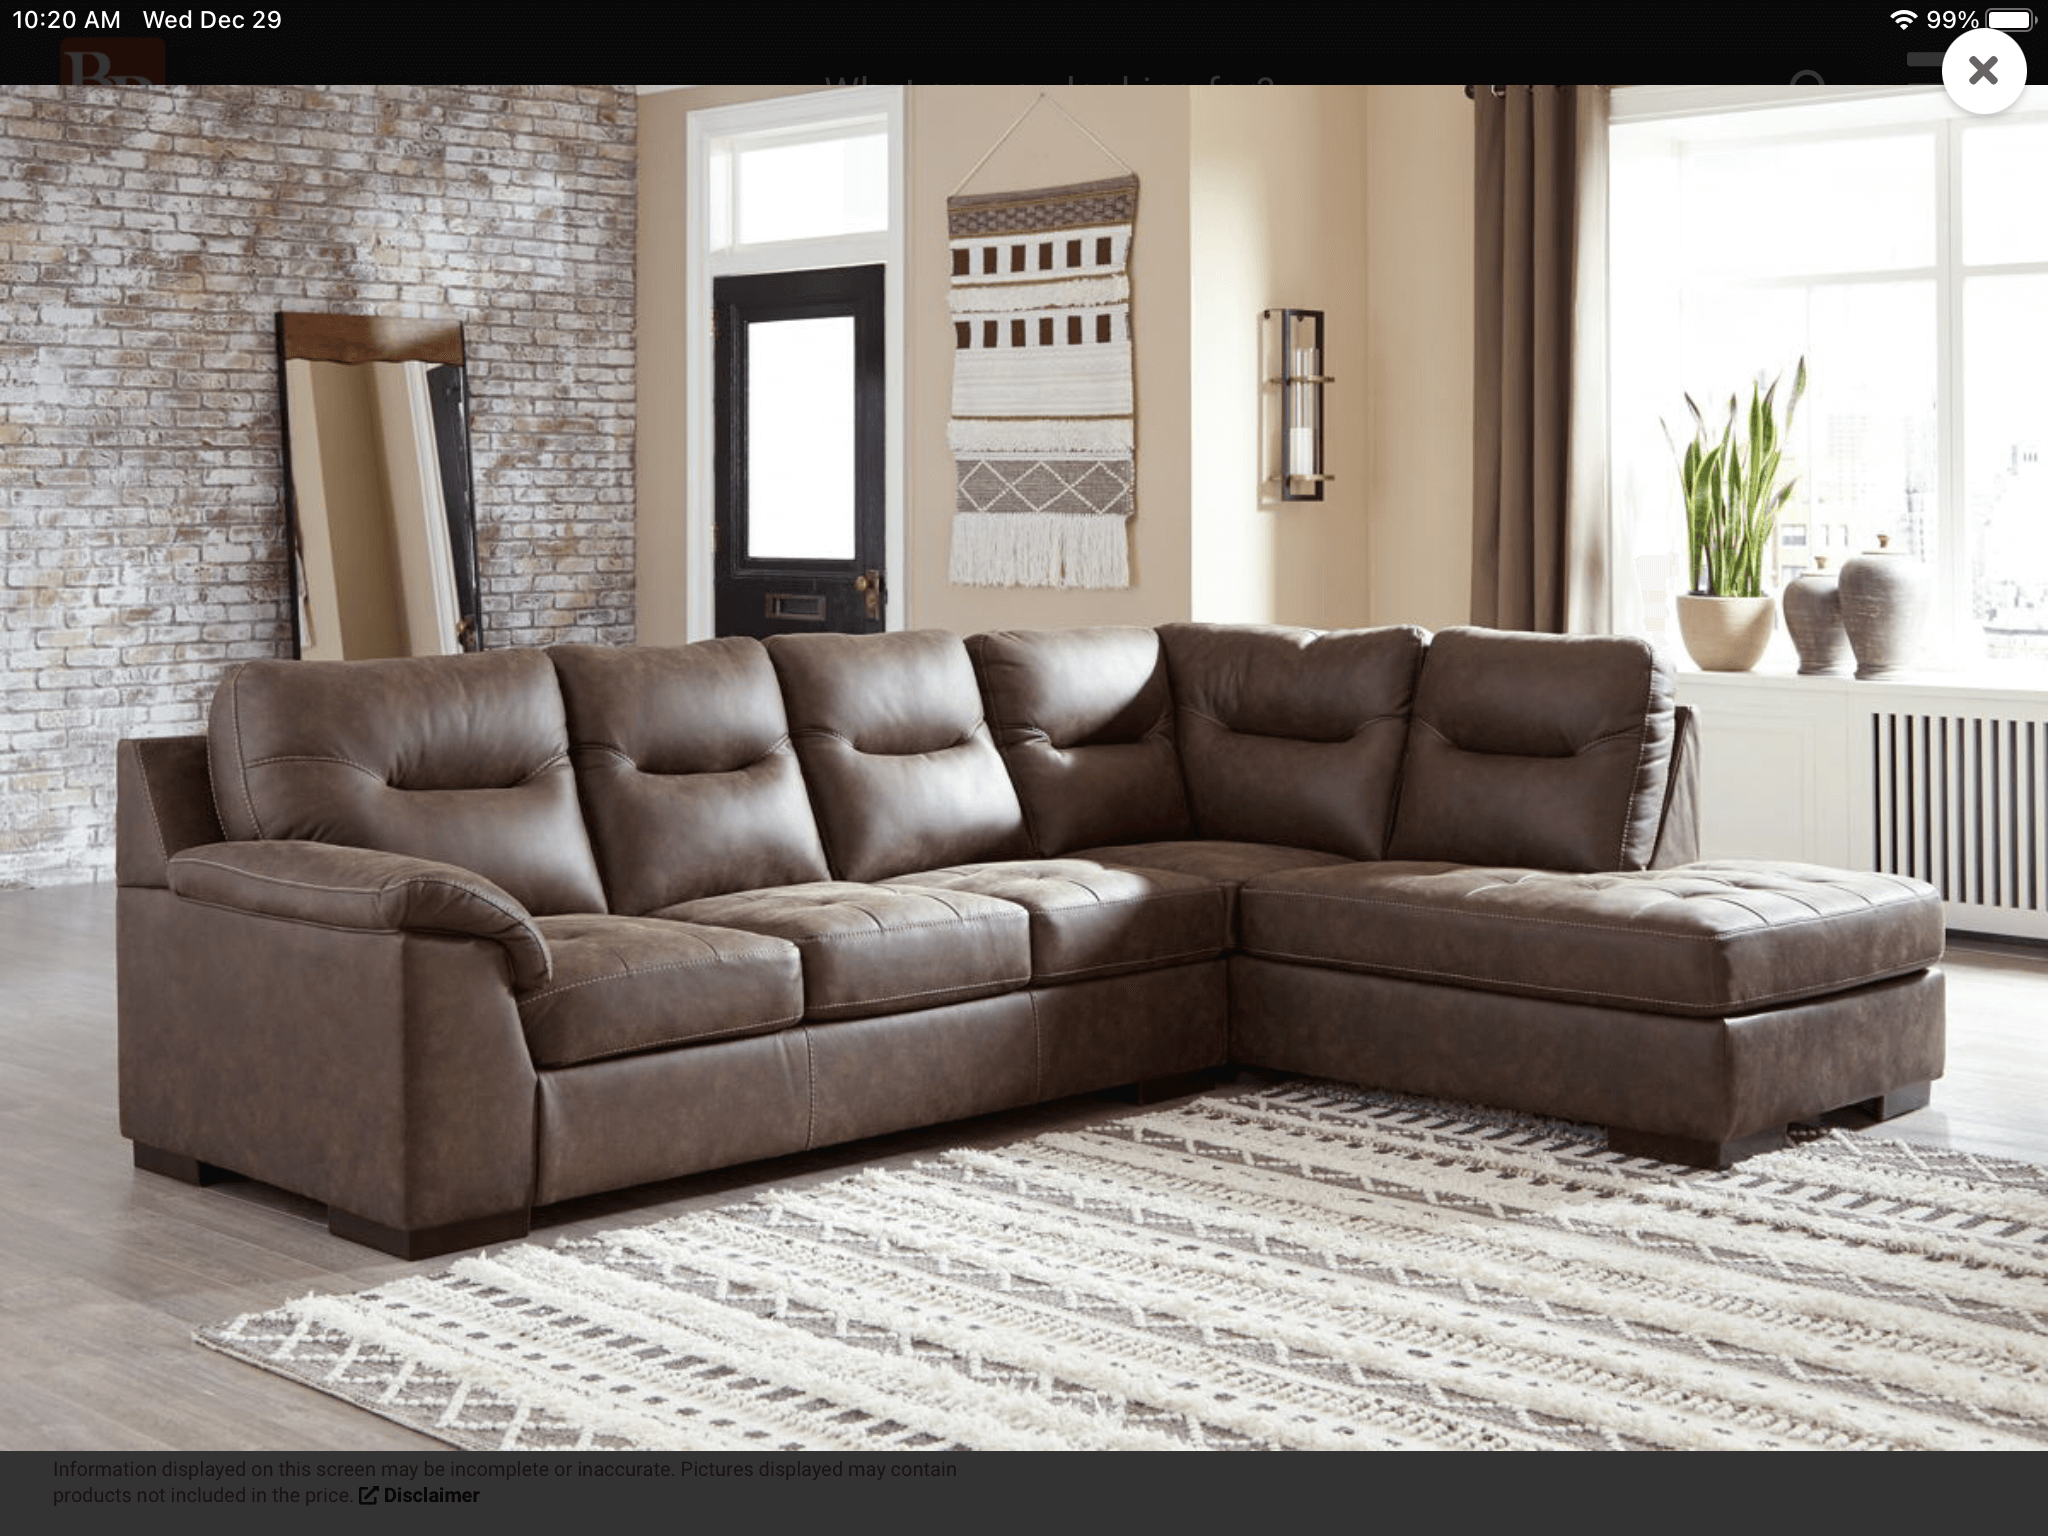 Model 620 Walnut Leather Sectional Br